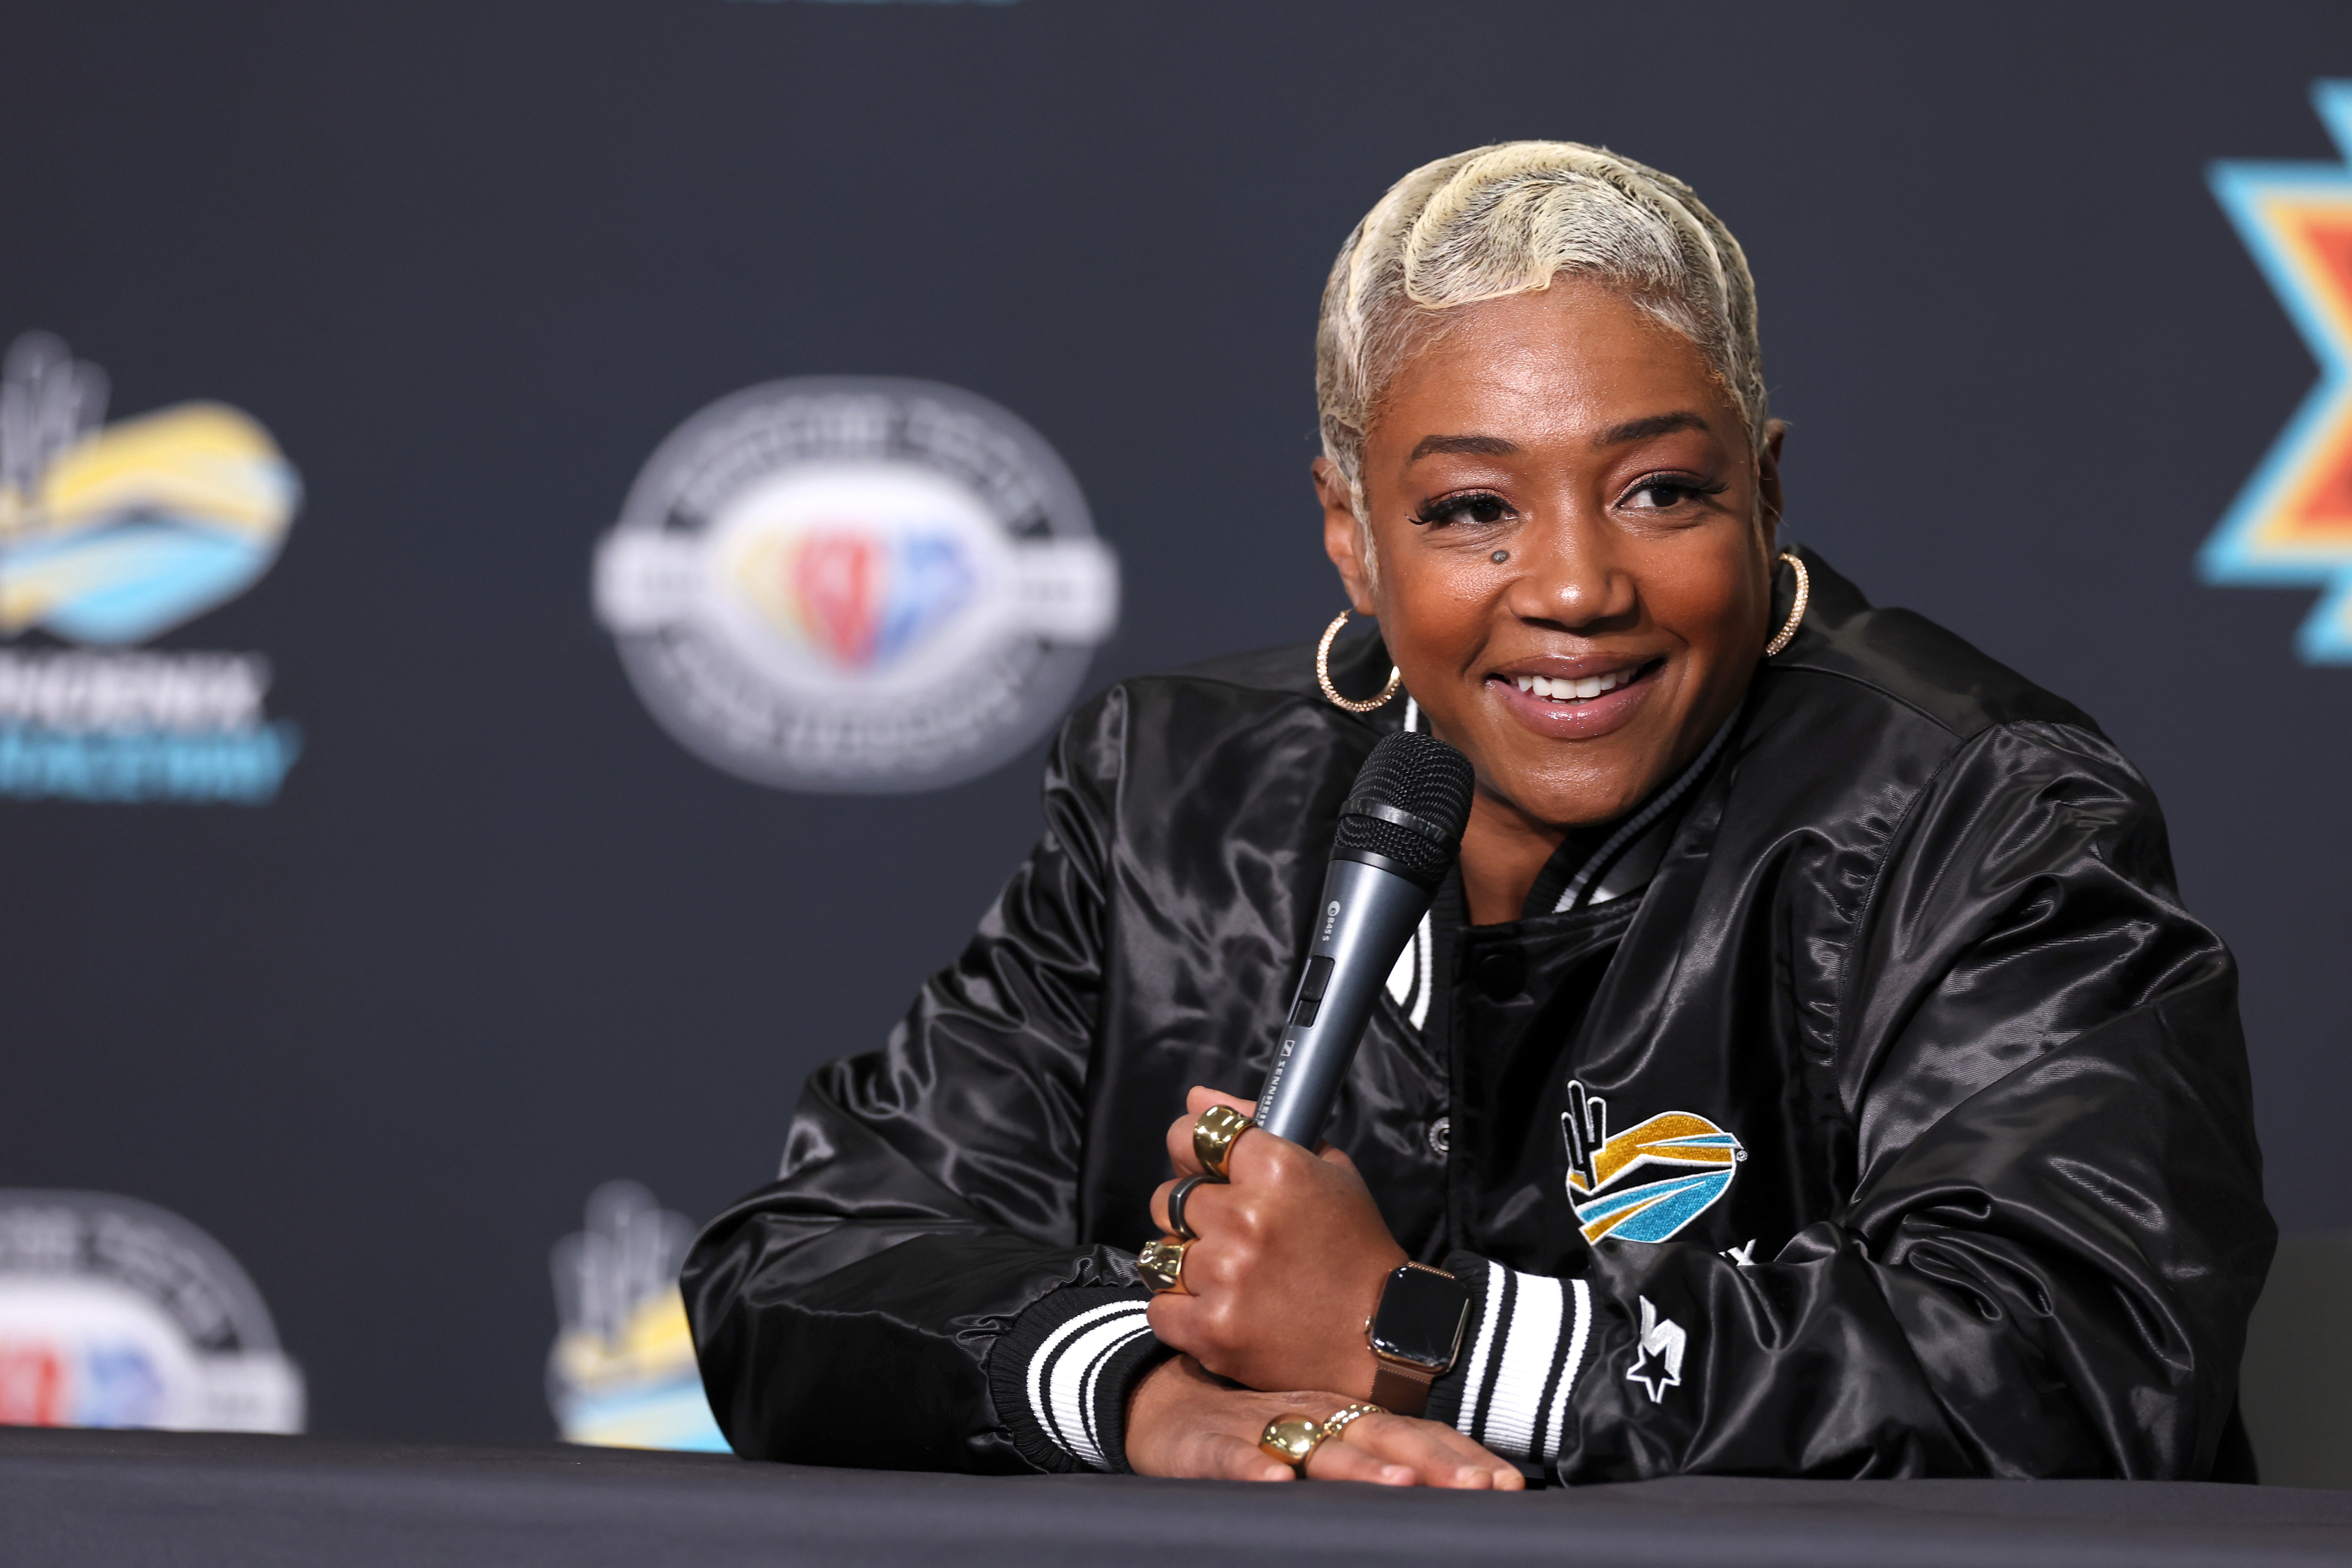 Tiffany Haddish answering questions at an event, wearing a black sports jacket with emblem